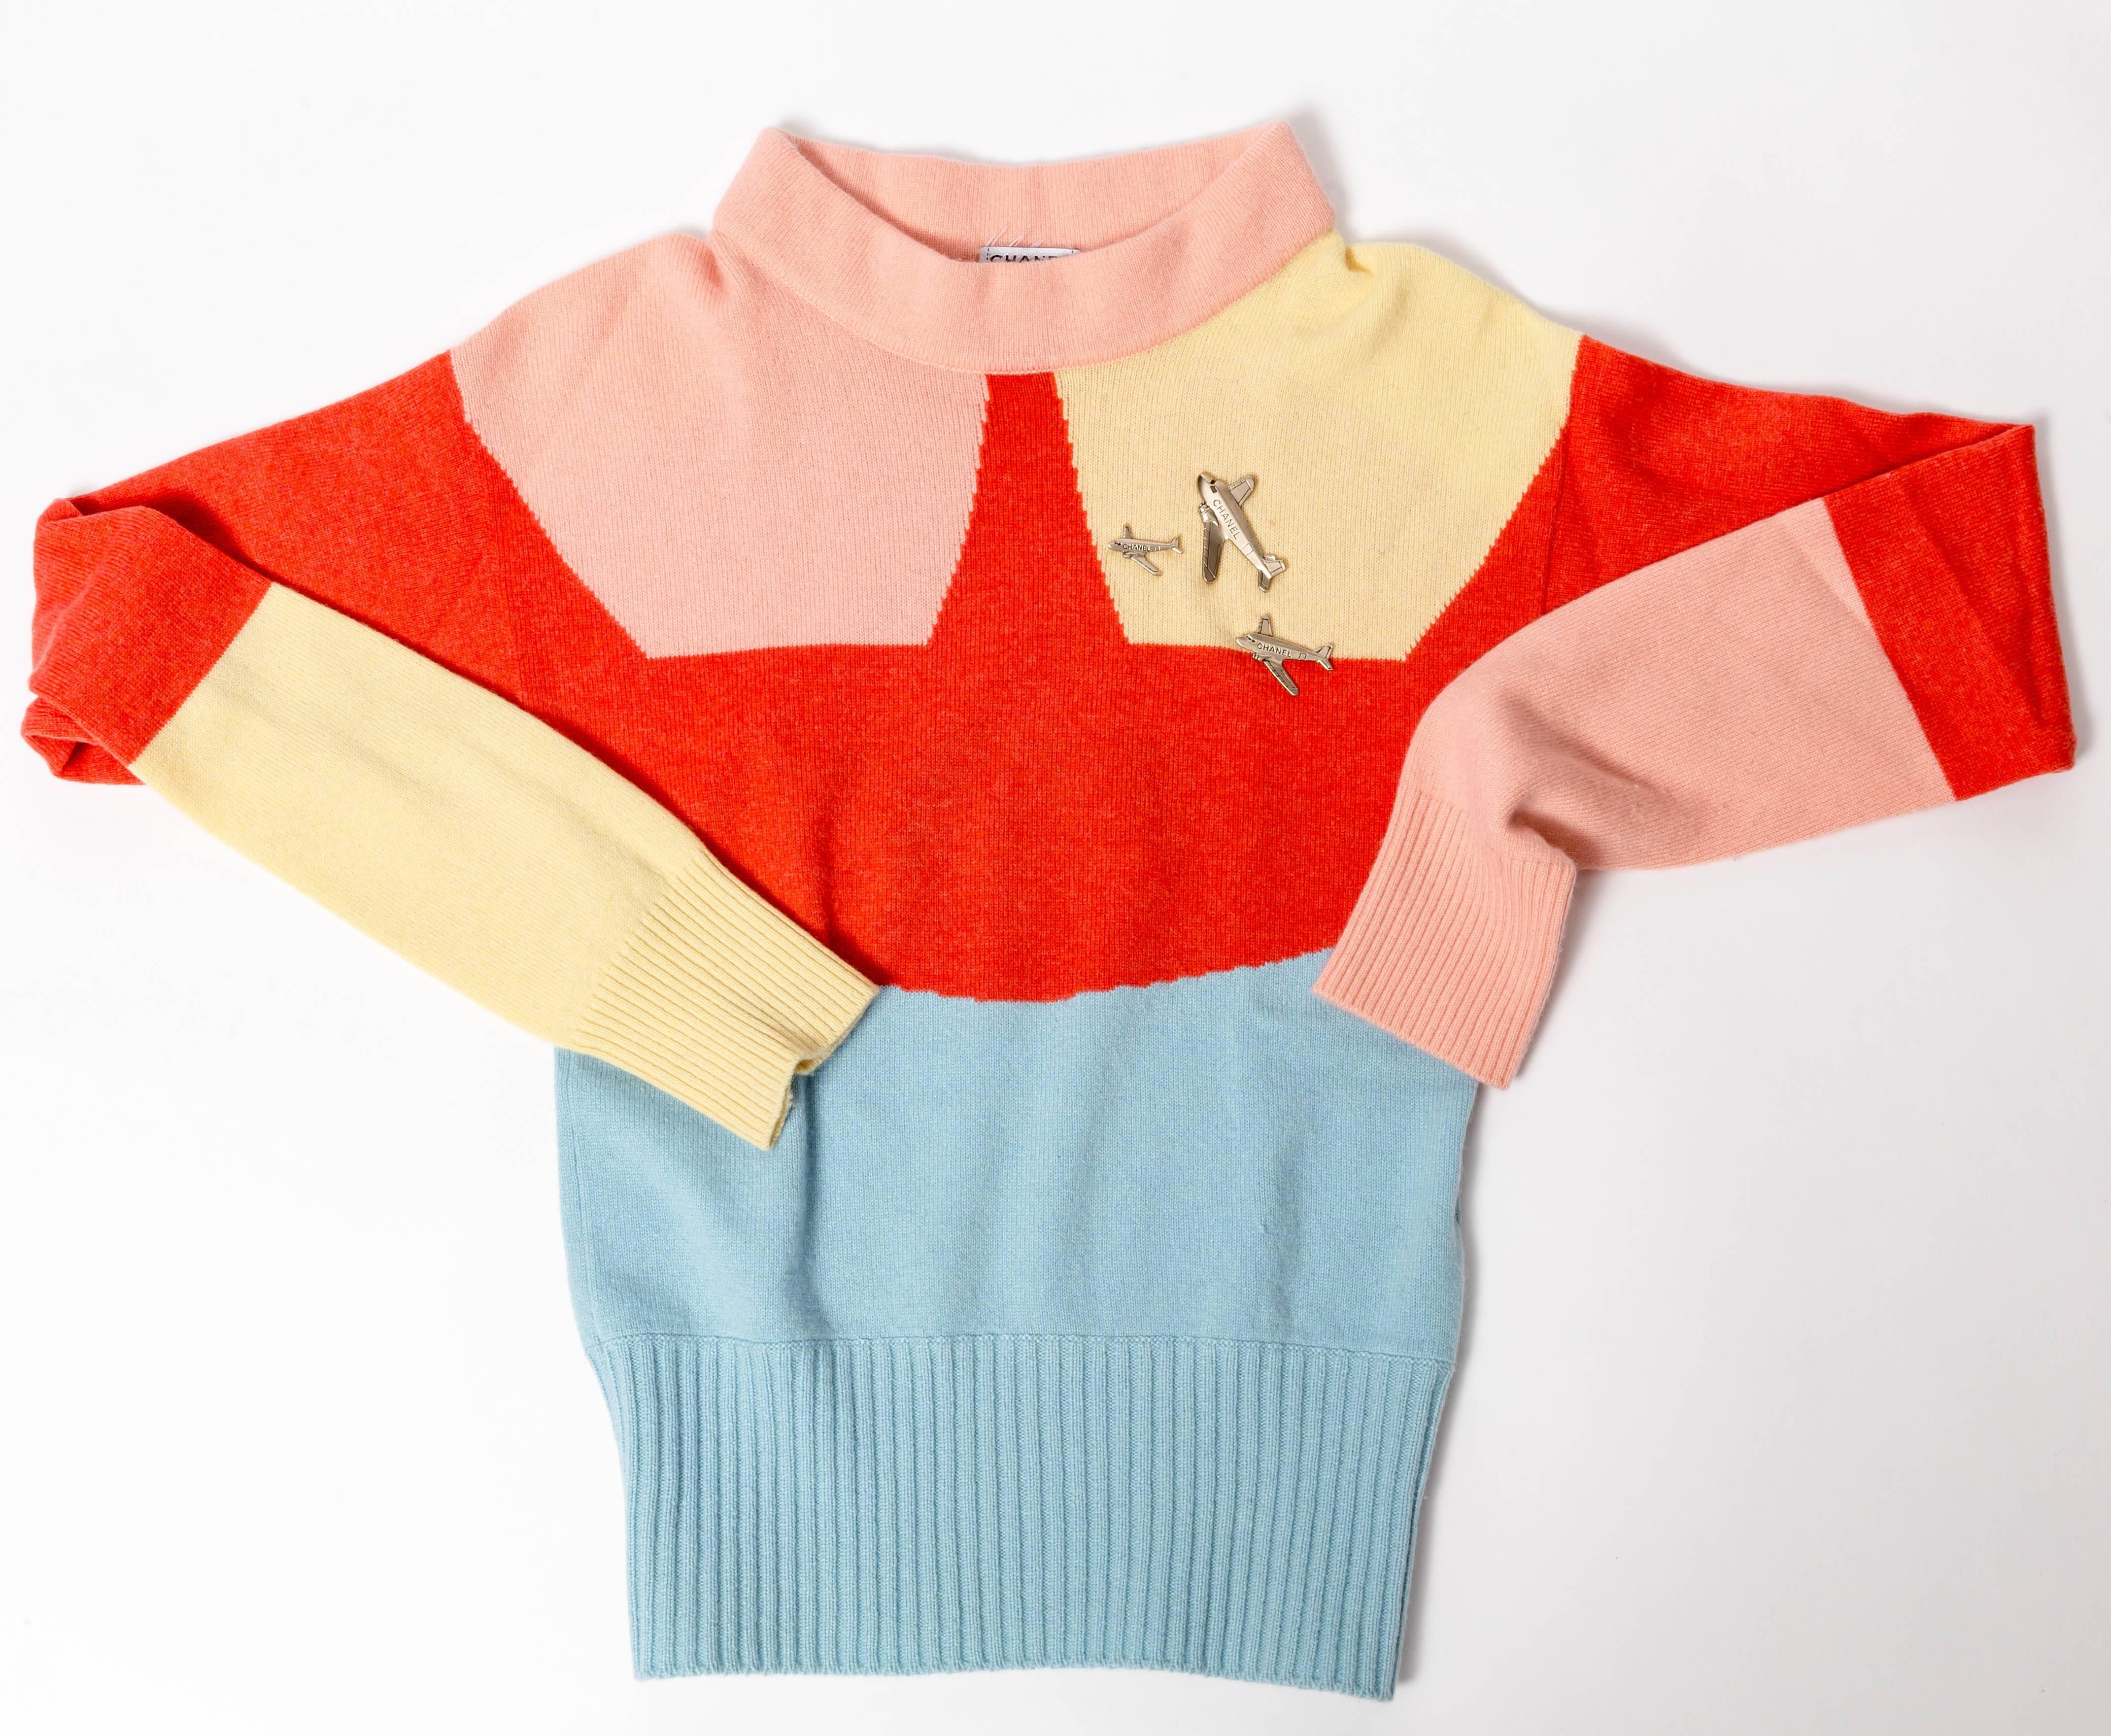 Very chic Chanel cashmere color blocked sweater with airplane charms.
In shades of blue, pink, orange and yellow with a charming cowl neck collar. P32421K00694
Airplane charms in silver metal and signed CHANEL are sewn on to the left breast of the